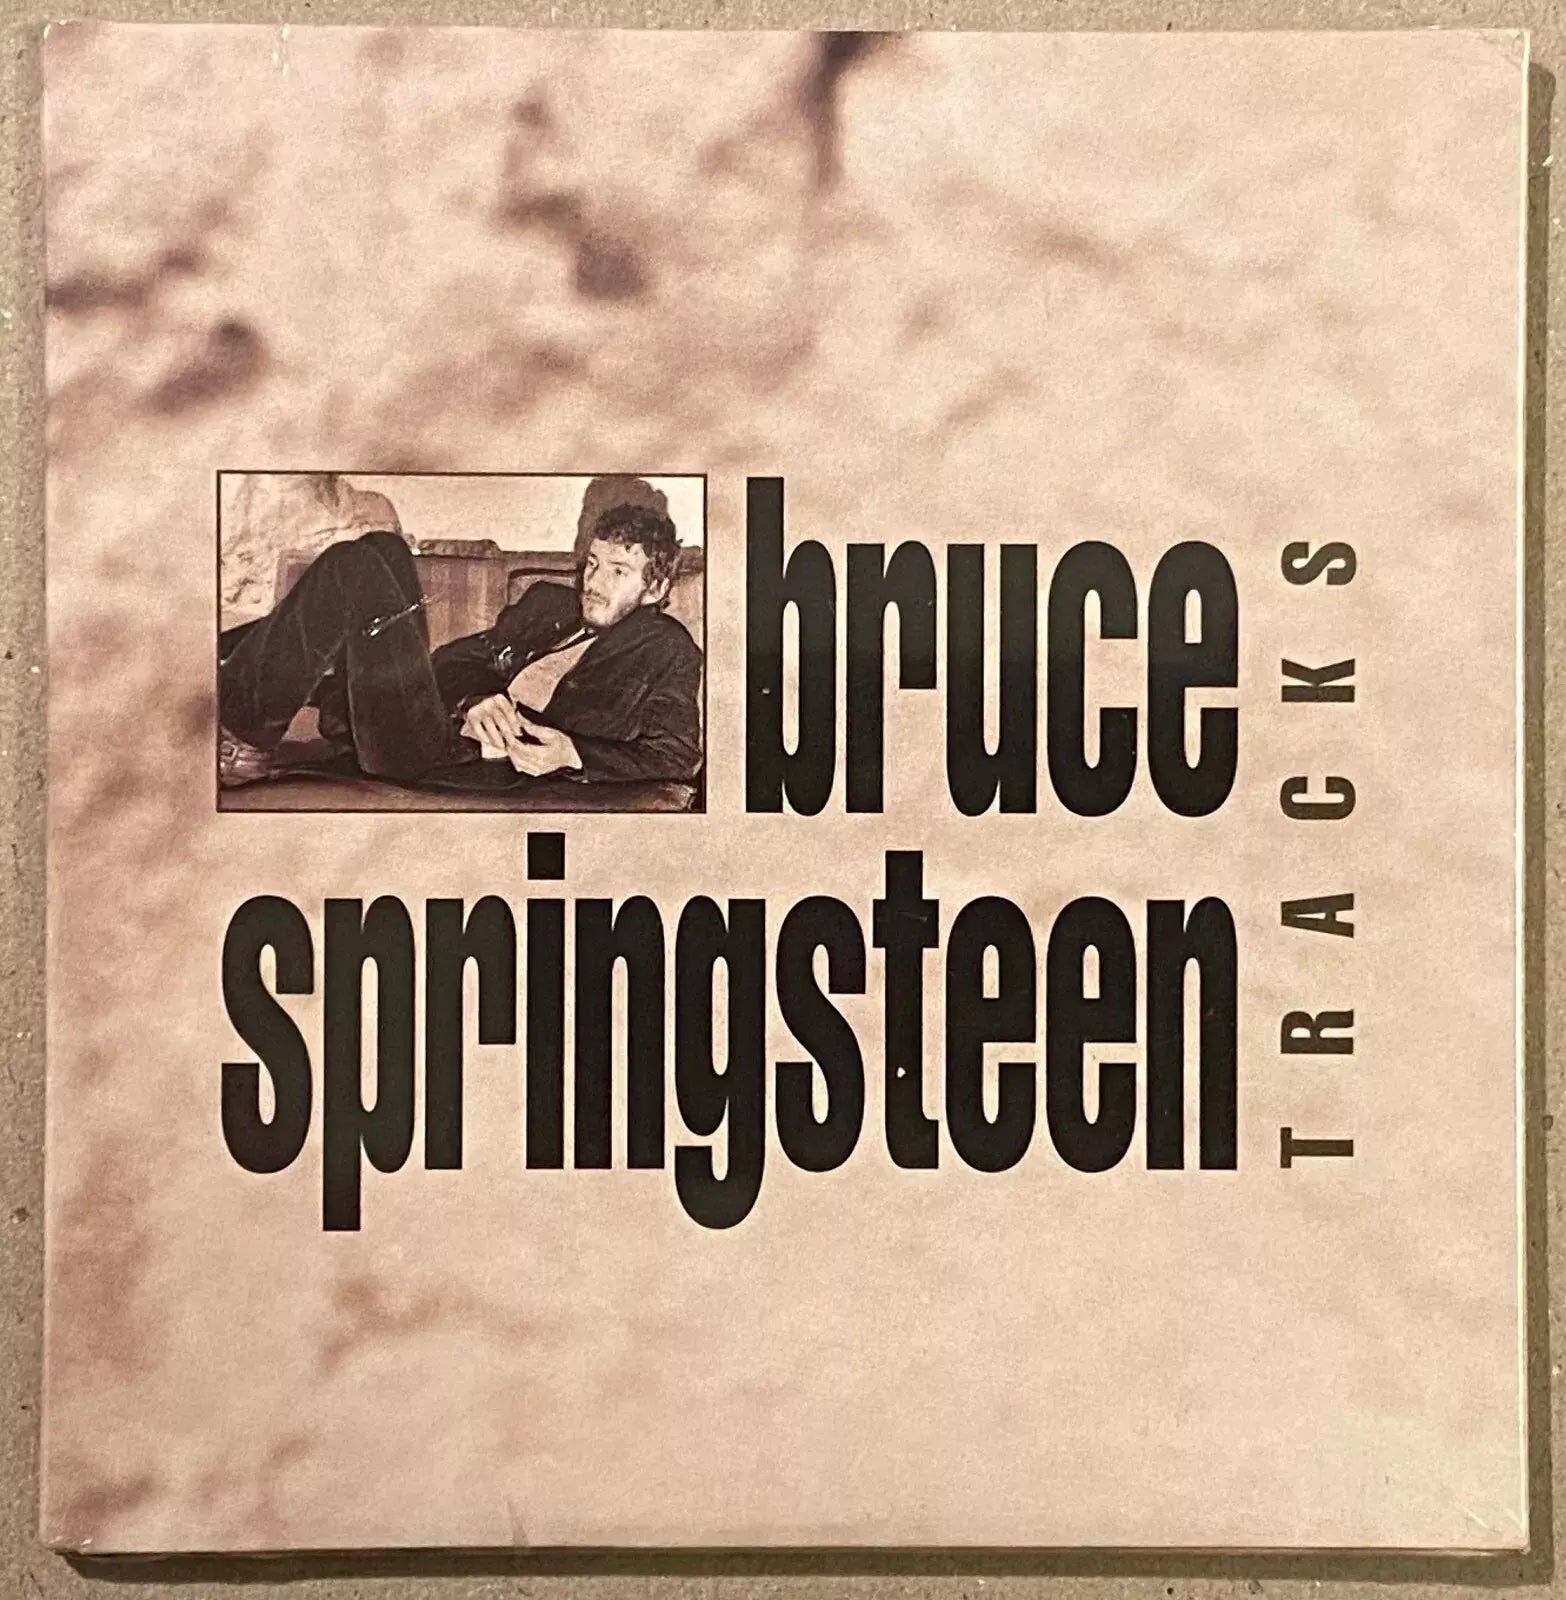 Bruce Springsteen - 3 Songs Promo (Used) (Mint Condition)